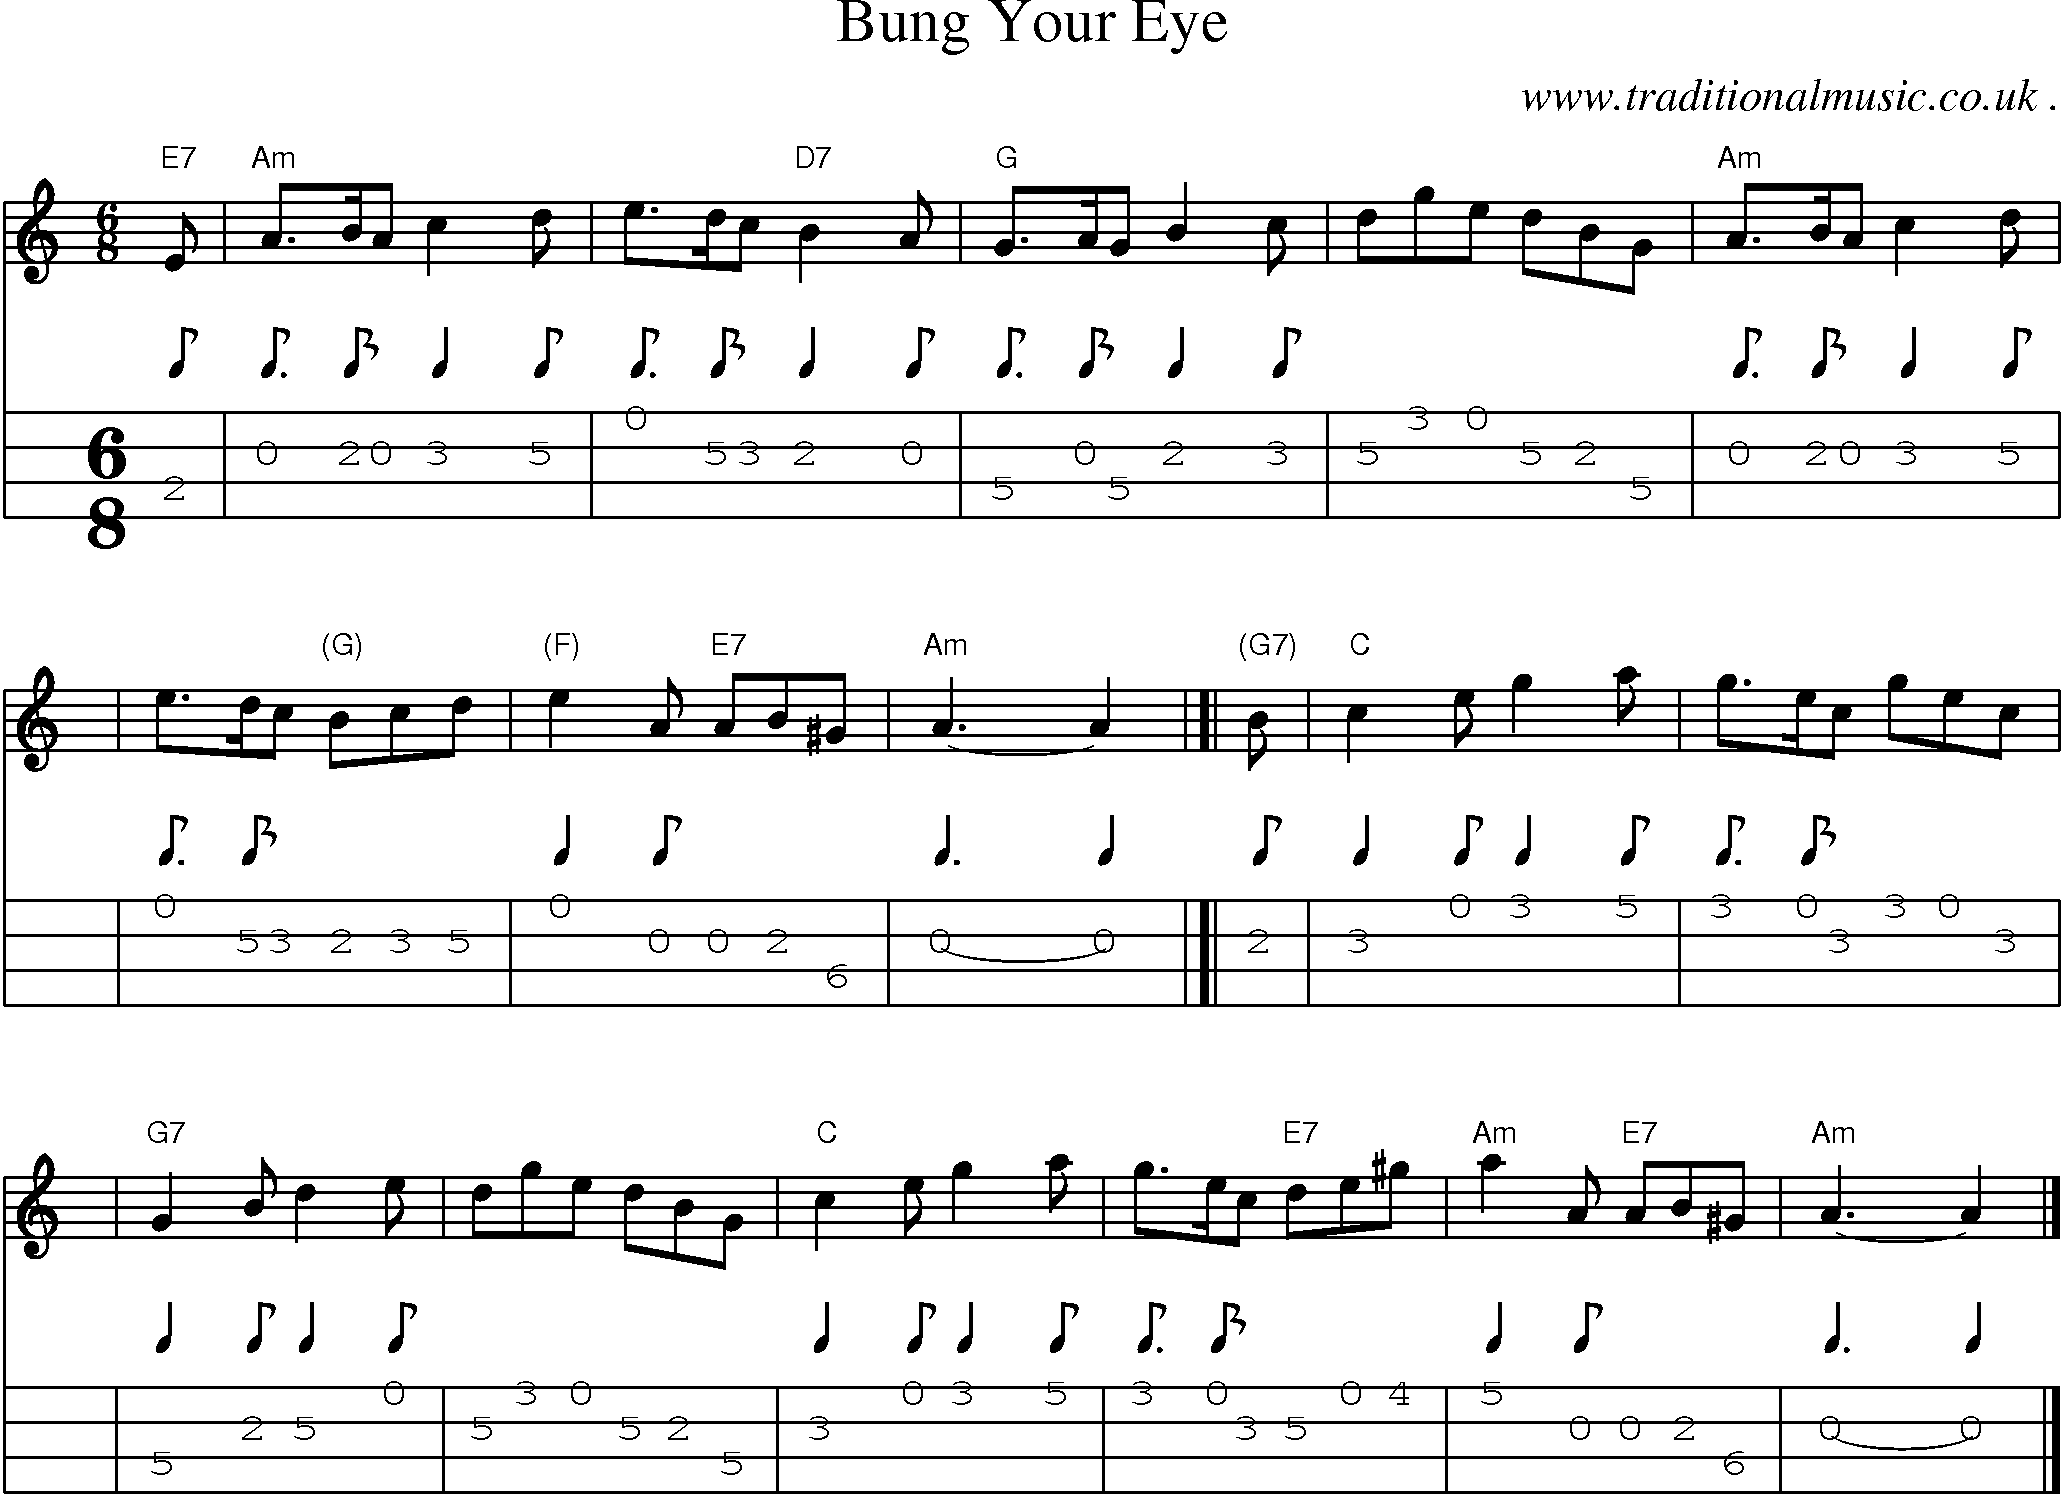 Sheet-music  score, Chords and Mandolin Tabs for Bung Your Eye